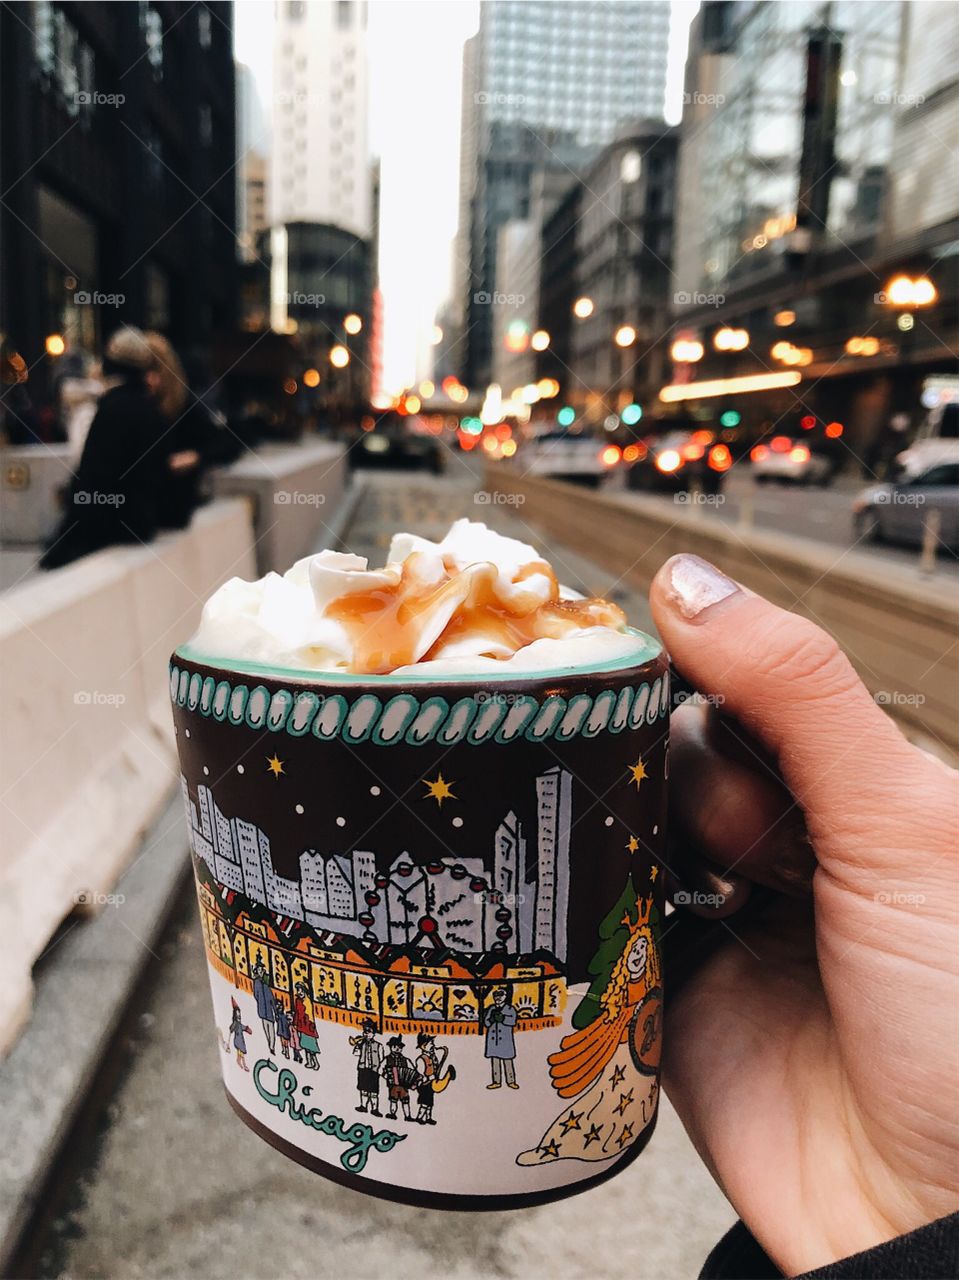 Apple cider from an adorable Christmas market in Chicago